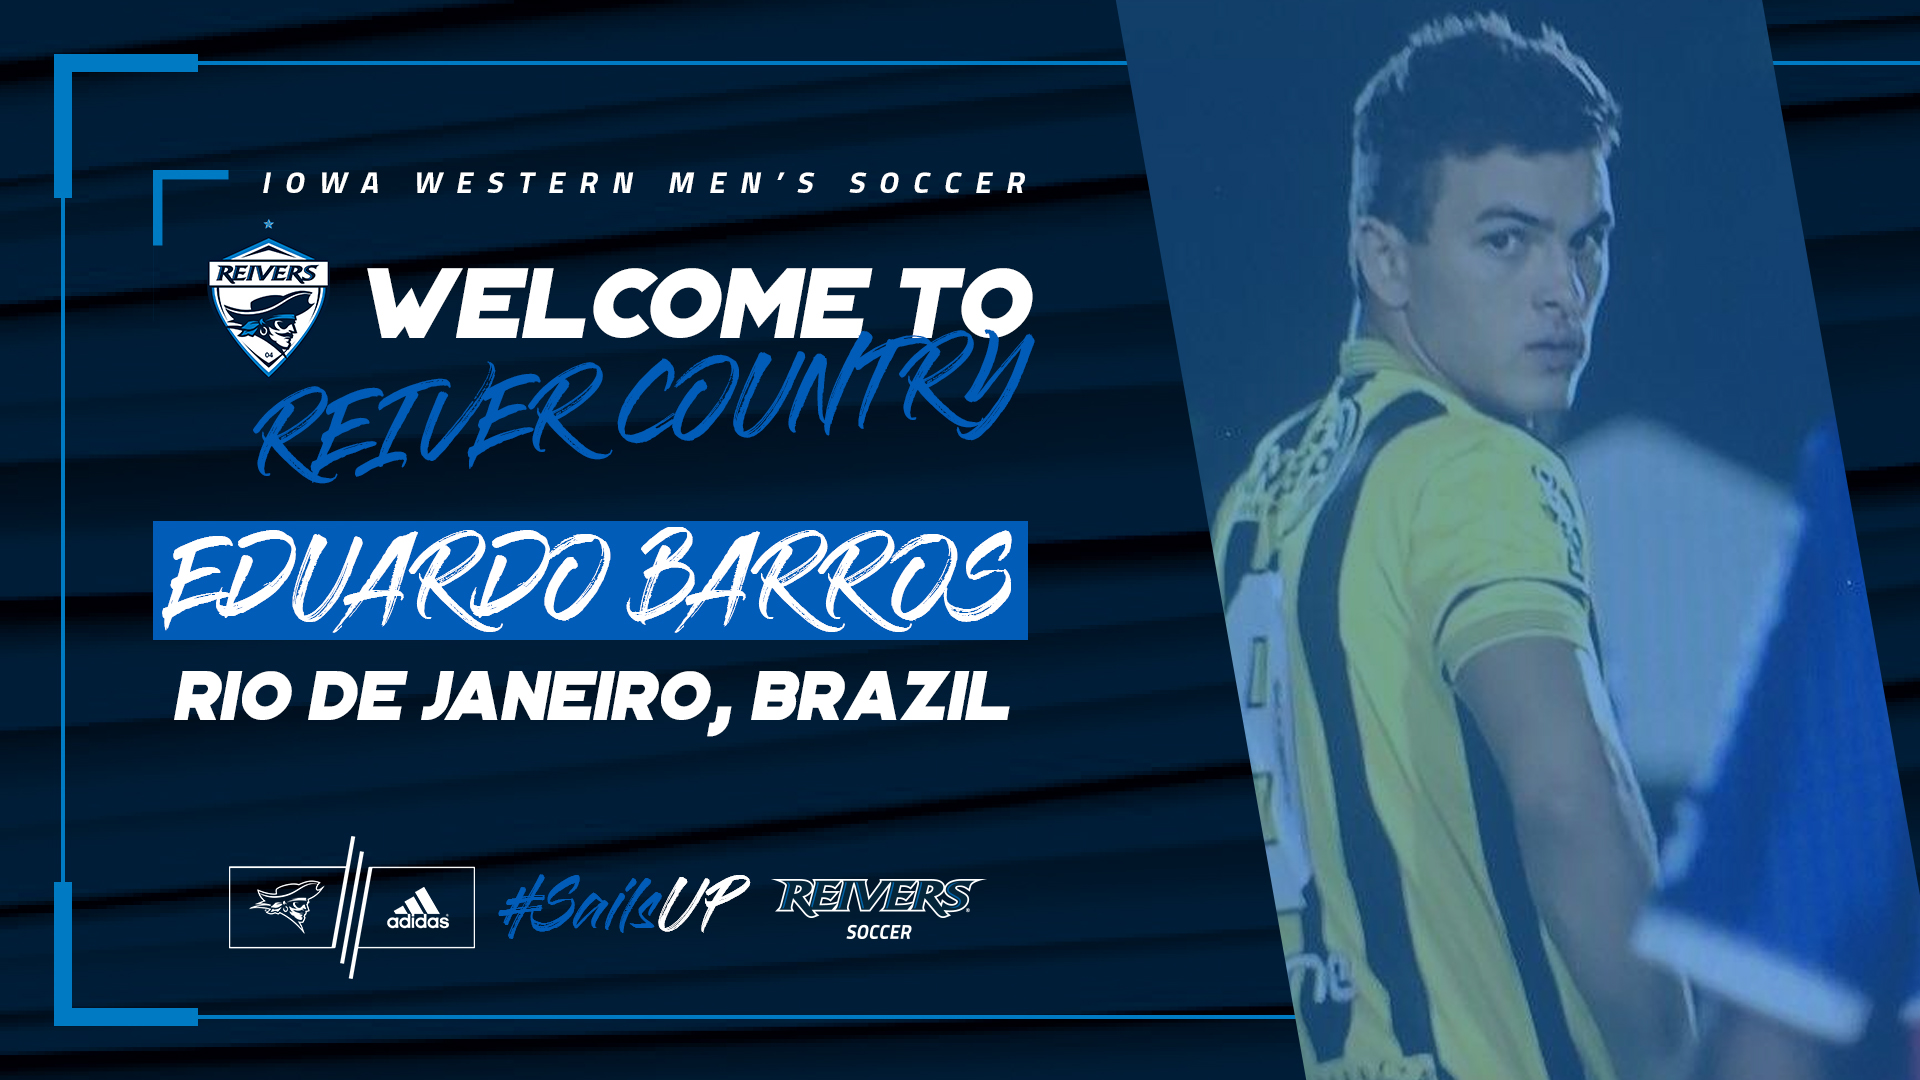 Iowa Western men's soccer announces the signing of Eduardo Barros from Gateway Christian Academy